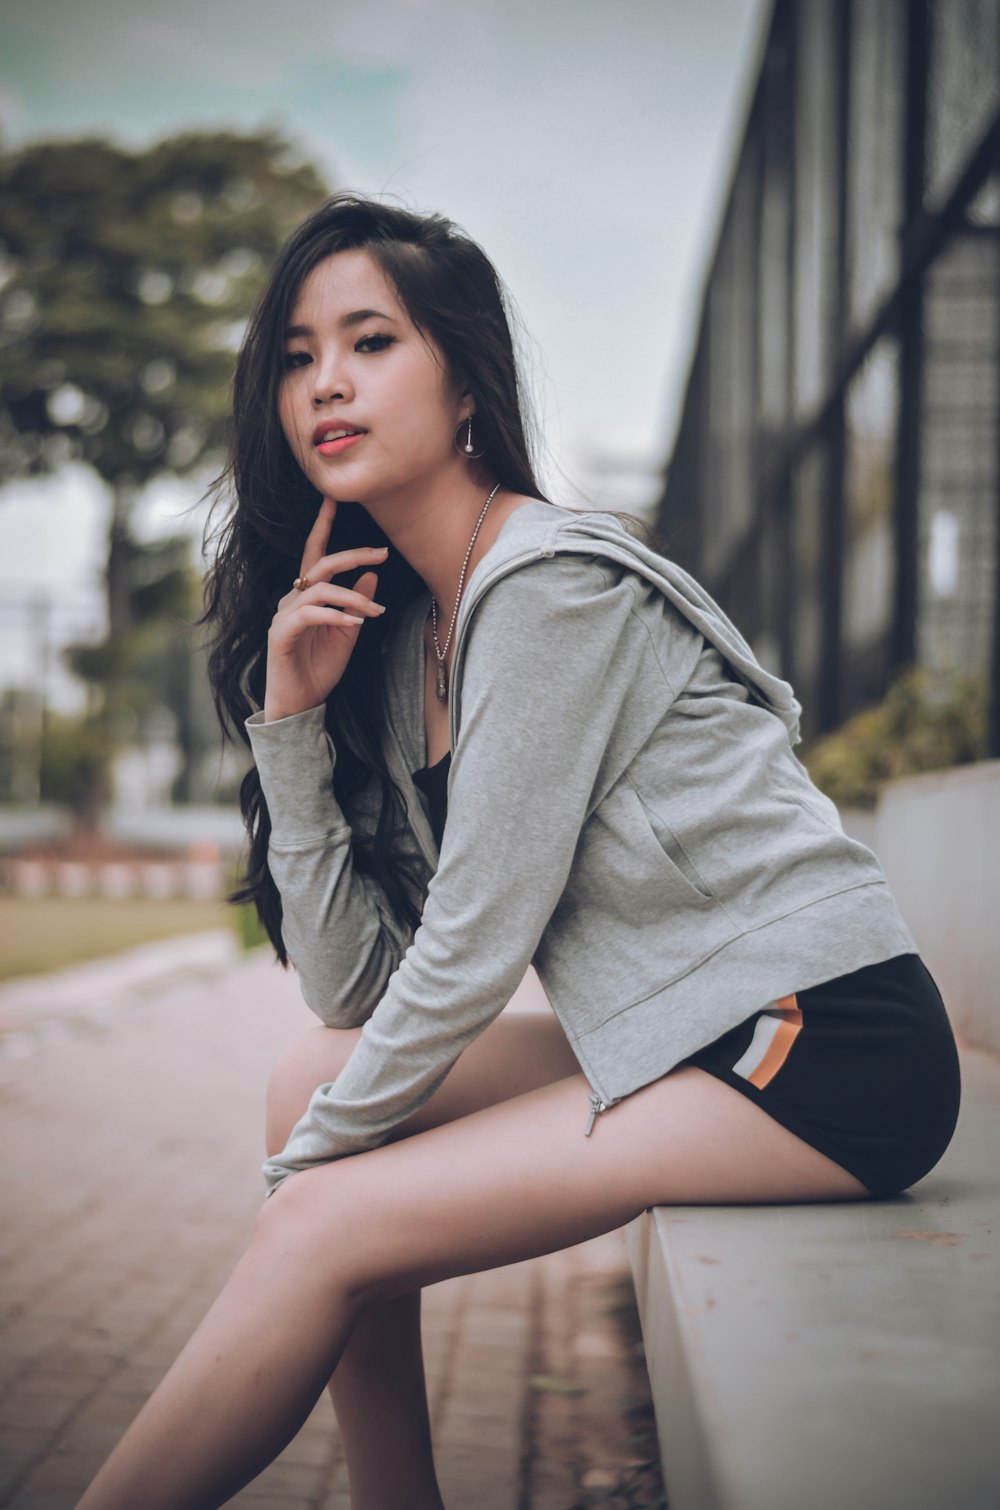 woman in grey zip-up hoodie and black shorts sitting on concrete bench